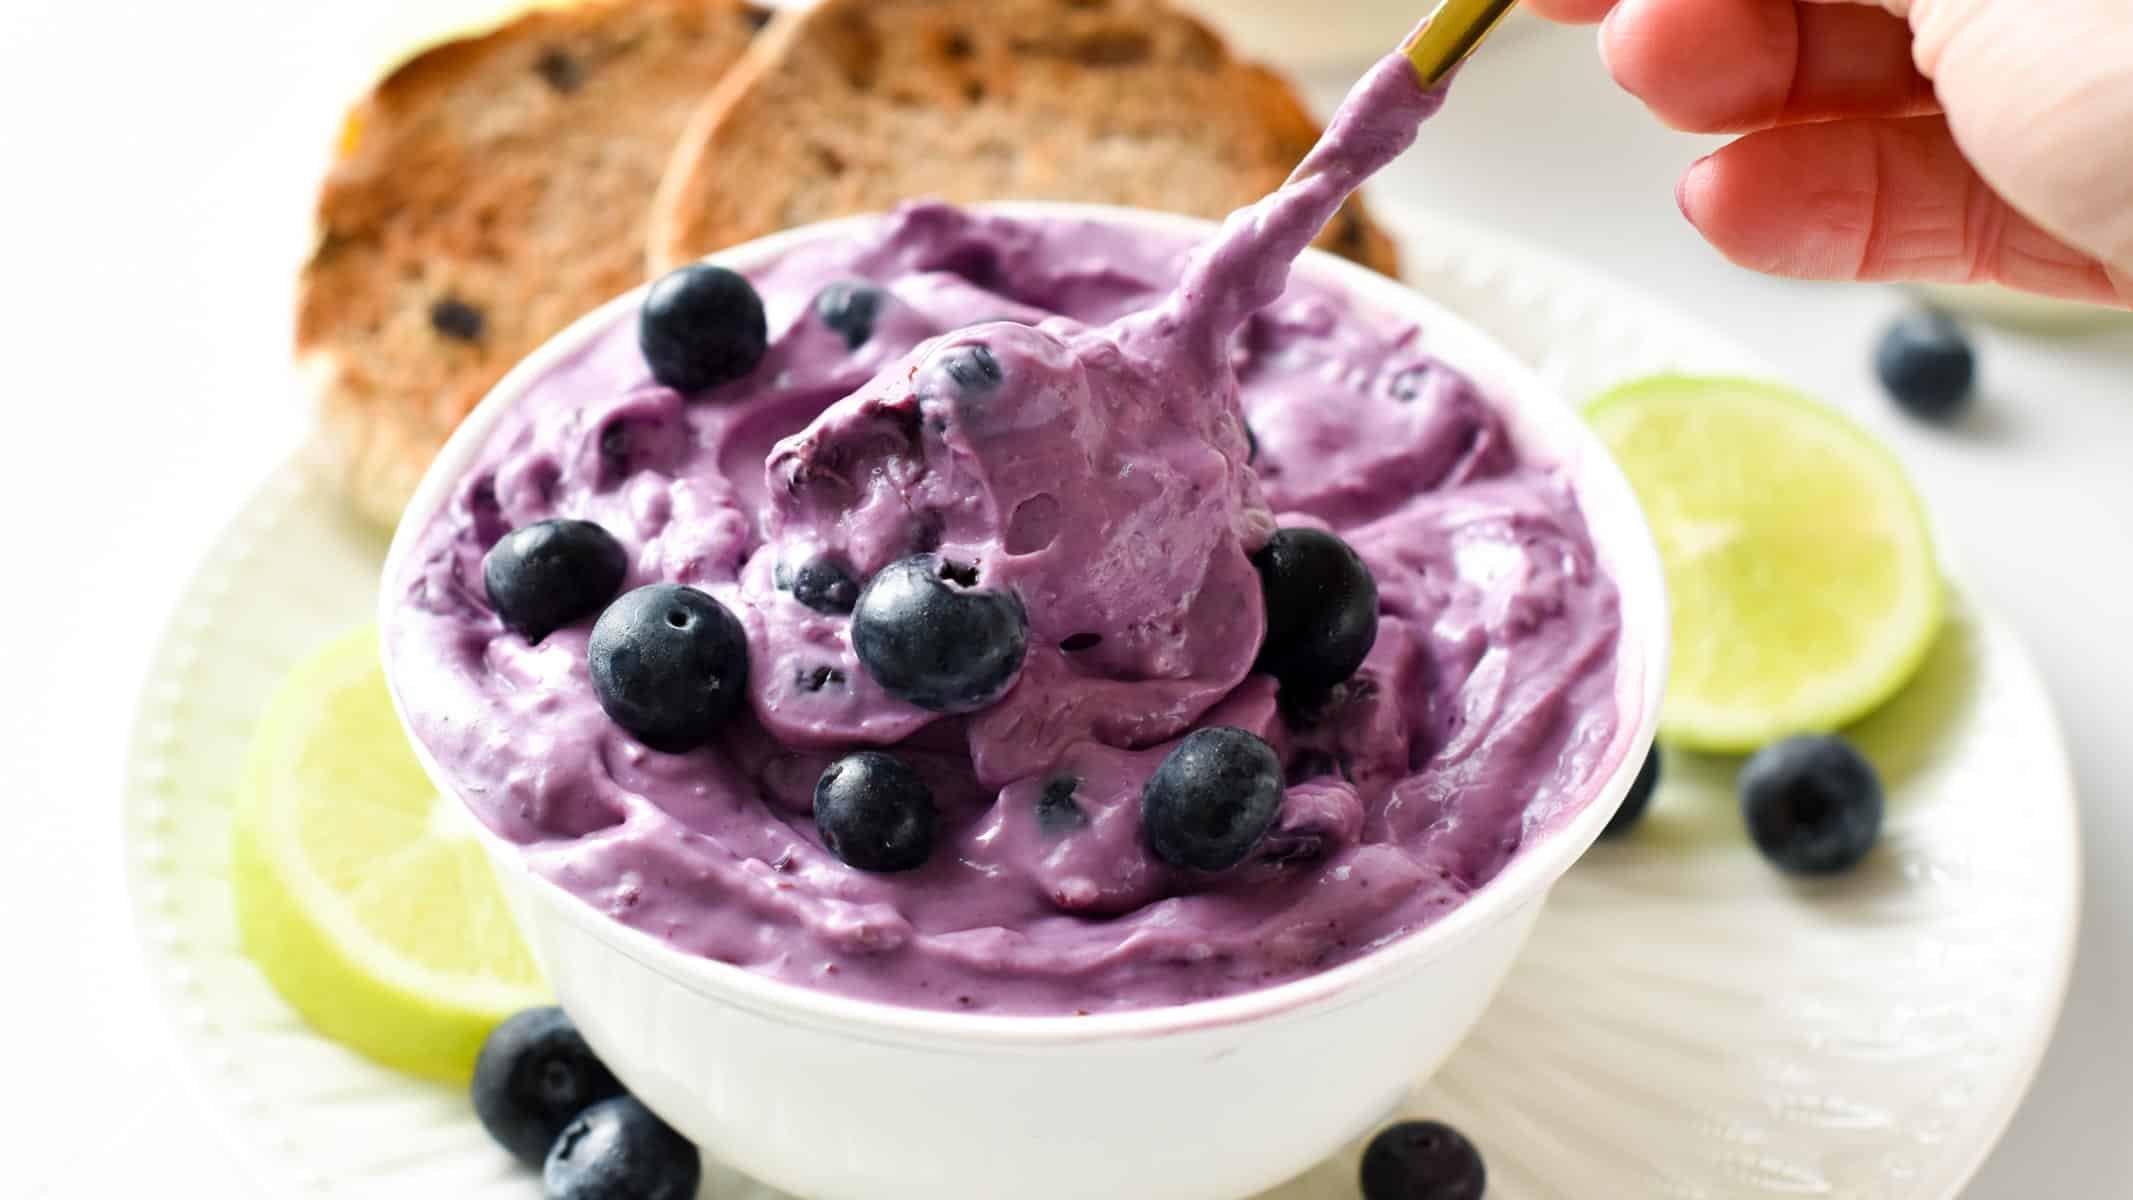 This Blueberry Cream Cheese is a tasty sweet cream cheese spread that taste like blueberry cheesecake. It's a delicious addition to toasted English muffins, and bagels or to eat by the spoon as a sweet treat.This Blueberry Cream Cheese is a tasty sweet cream cheese spread that taste like blueberry cheesecake. It's a delicious addition to toasted English muffins, and bagels or to eat by the spoon as a sweet treat.